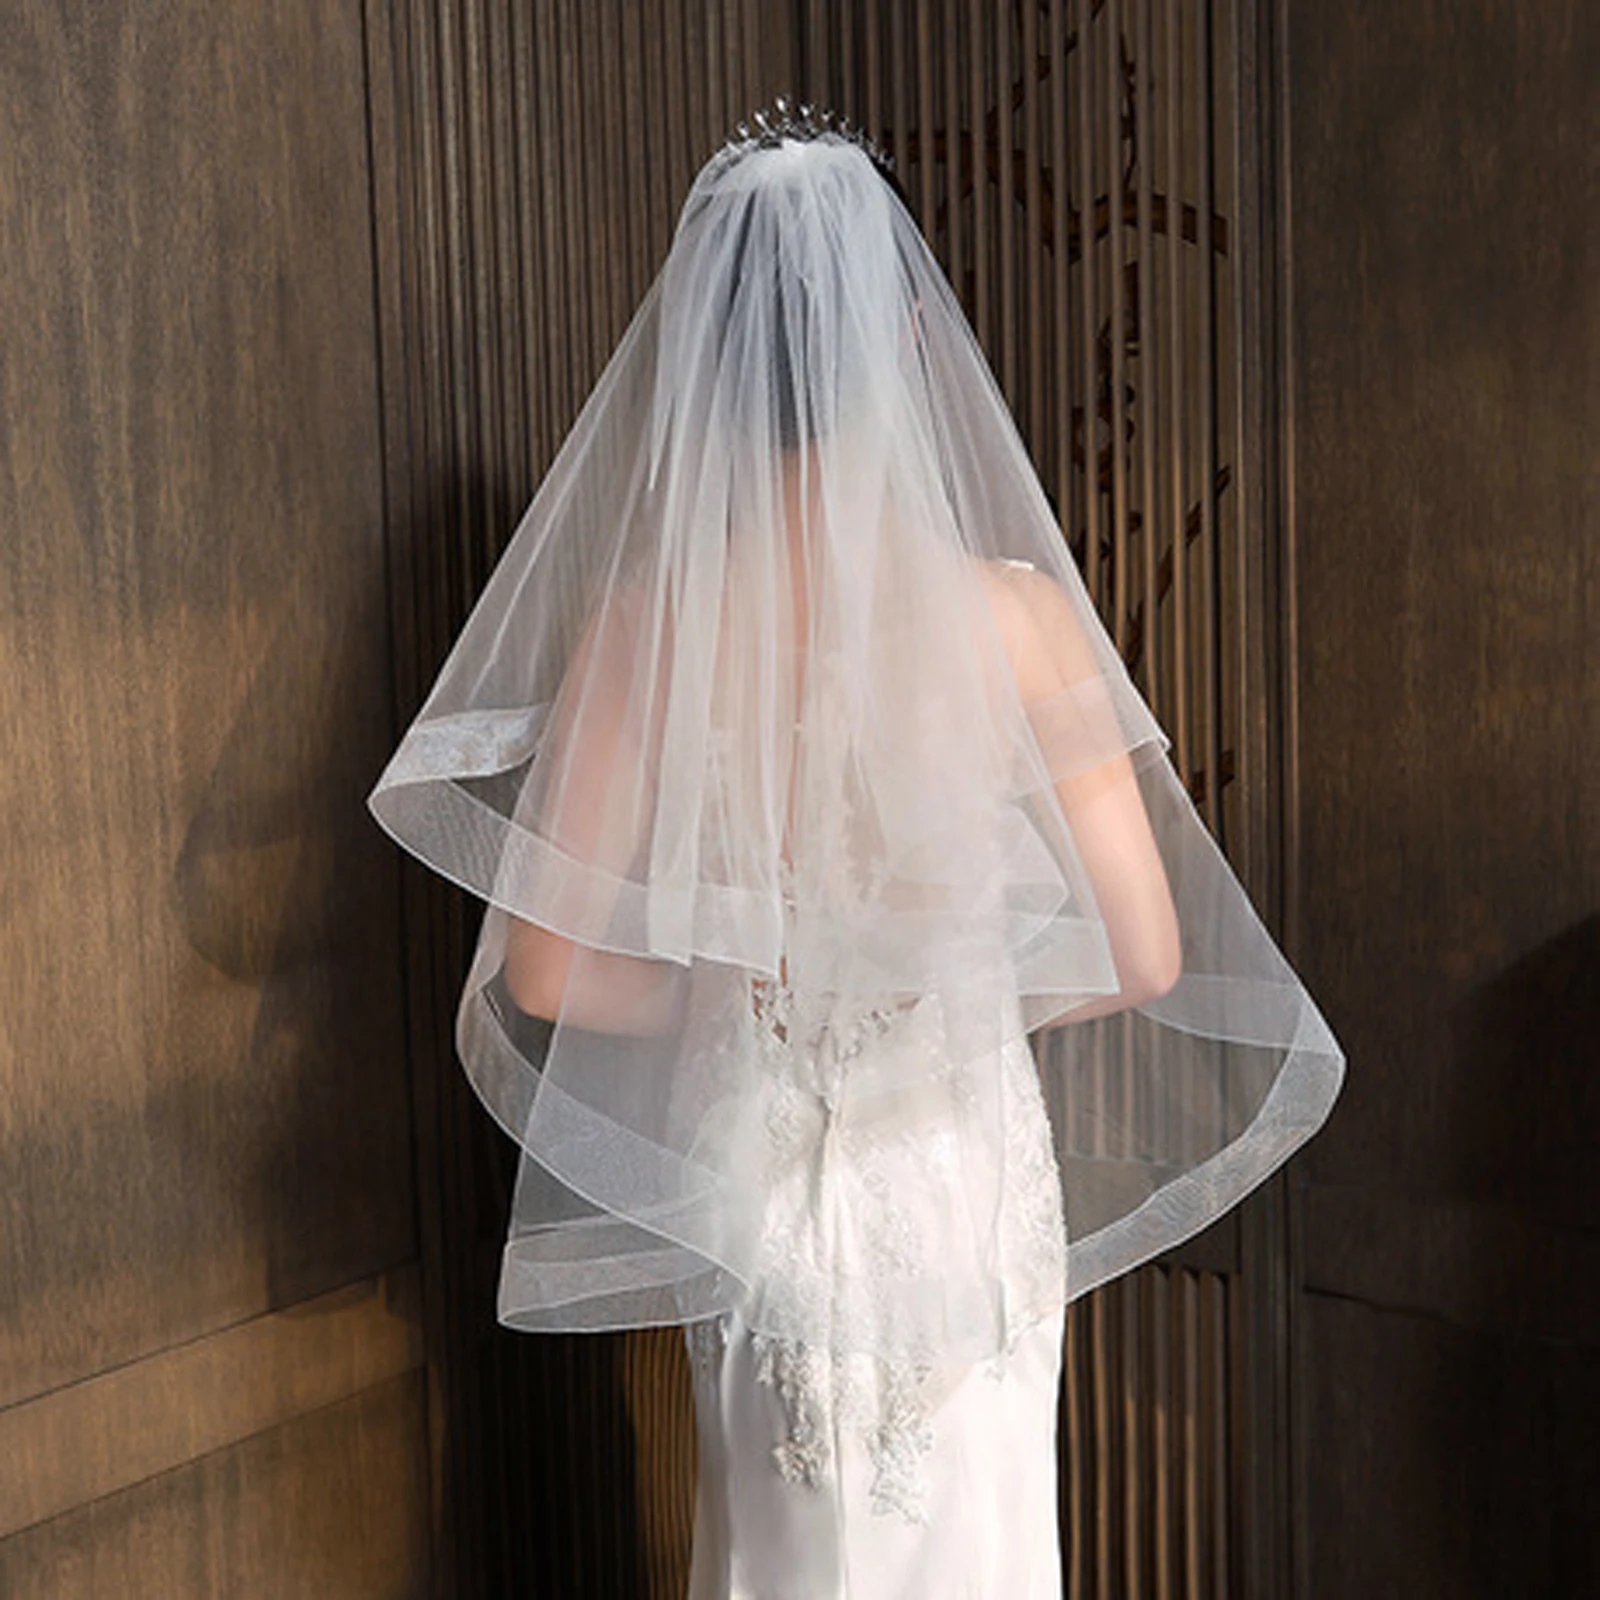 

V69 2 Layer Bridal Veil with Comb Short Drop Wedding Veils for Bride Rigid Organza Edge Hips First Communion Girl Accessories